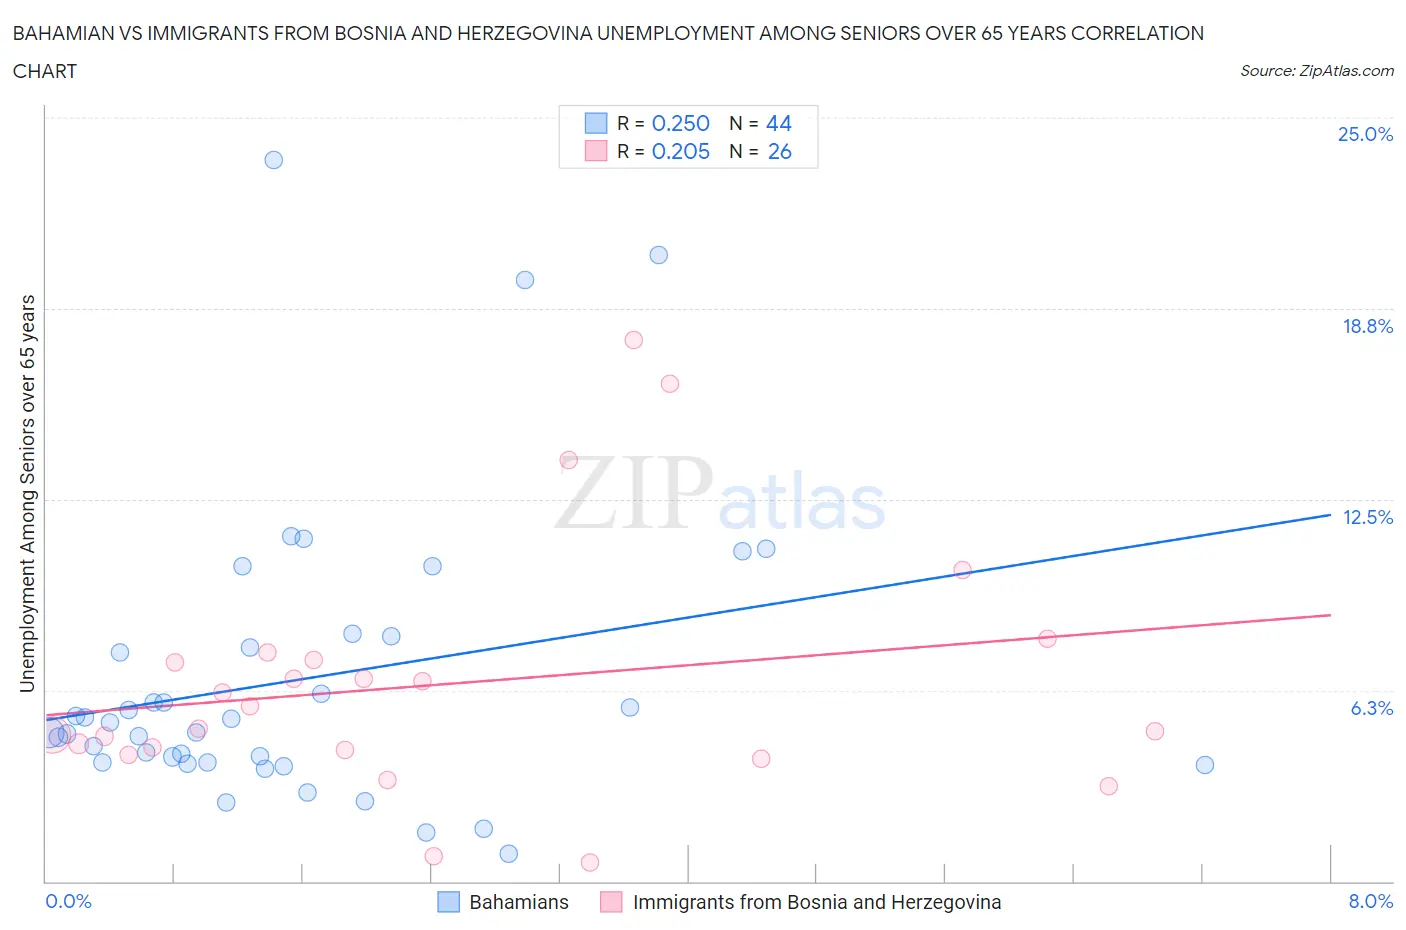 Bahamian vs Immigrants from Bosnia and Herzegovina Unemployment Among Seniors over 65 years